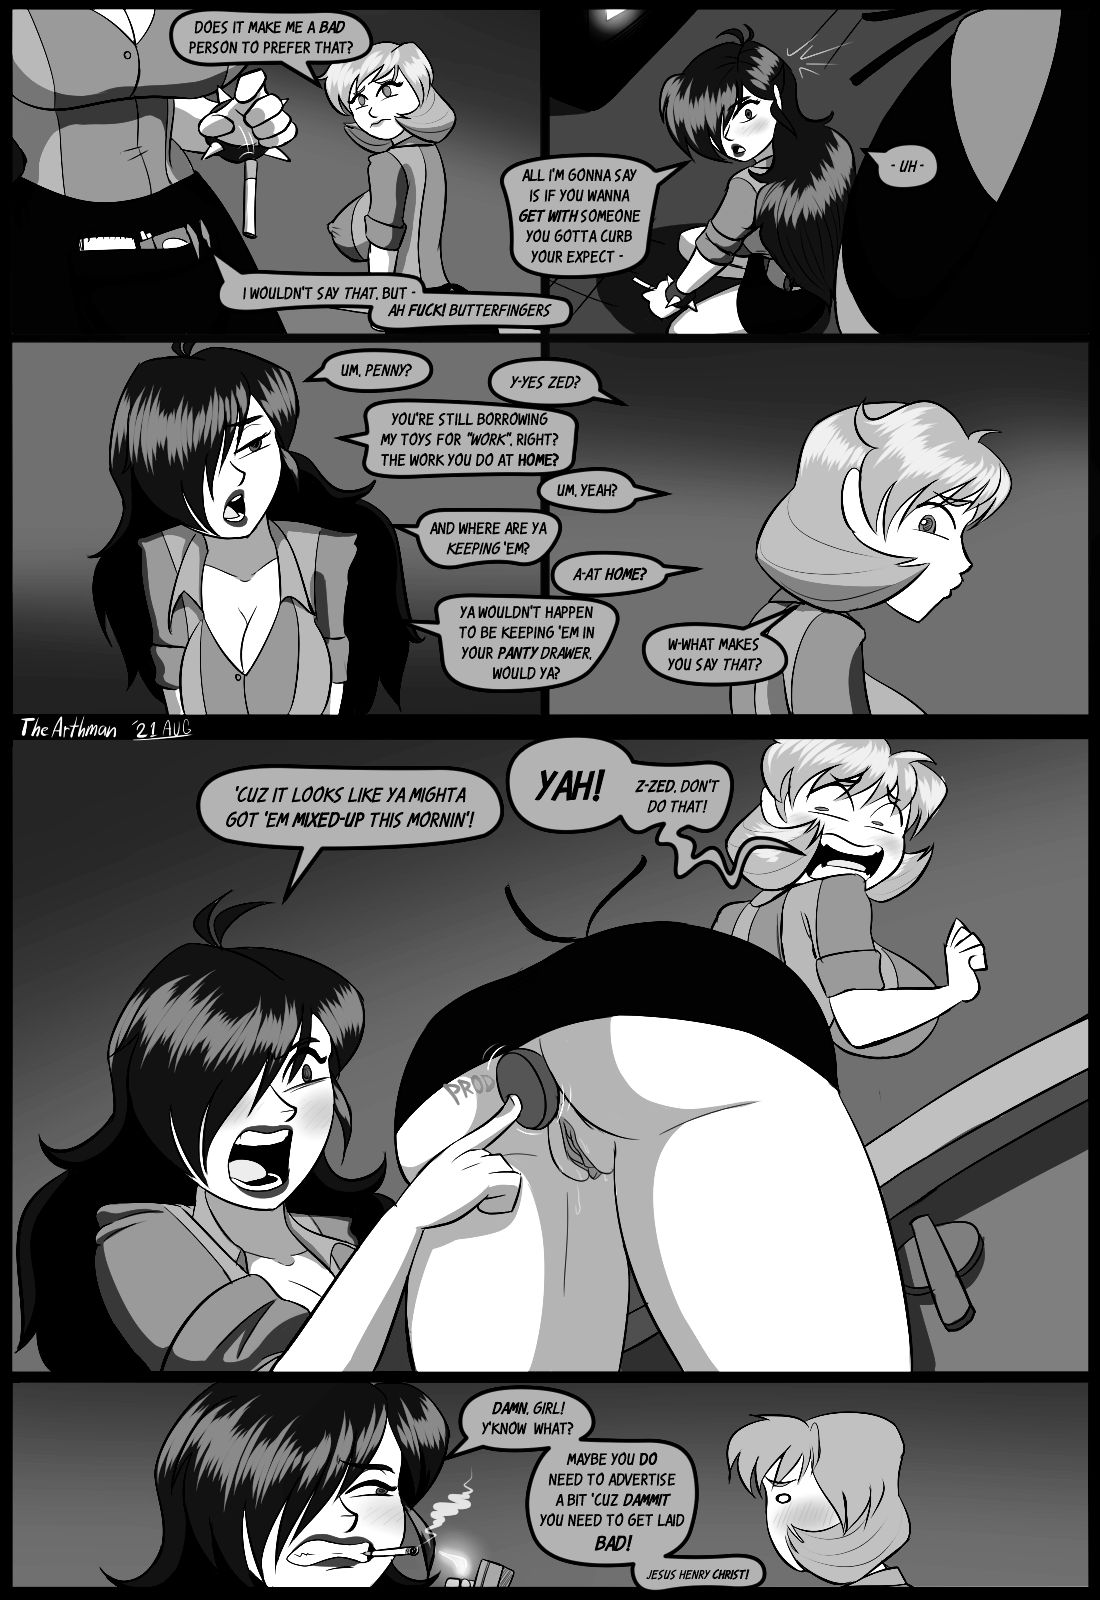 Dirtwater - Part 5 - One Night at Louie’s Porn Comic english 06